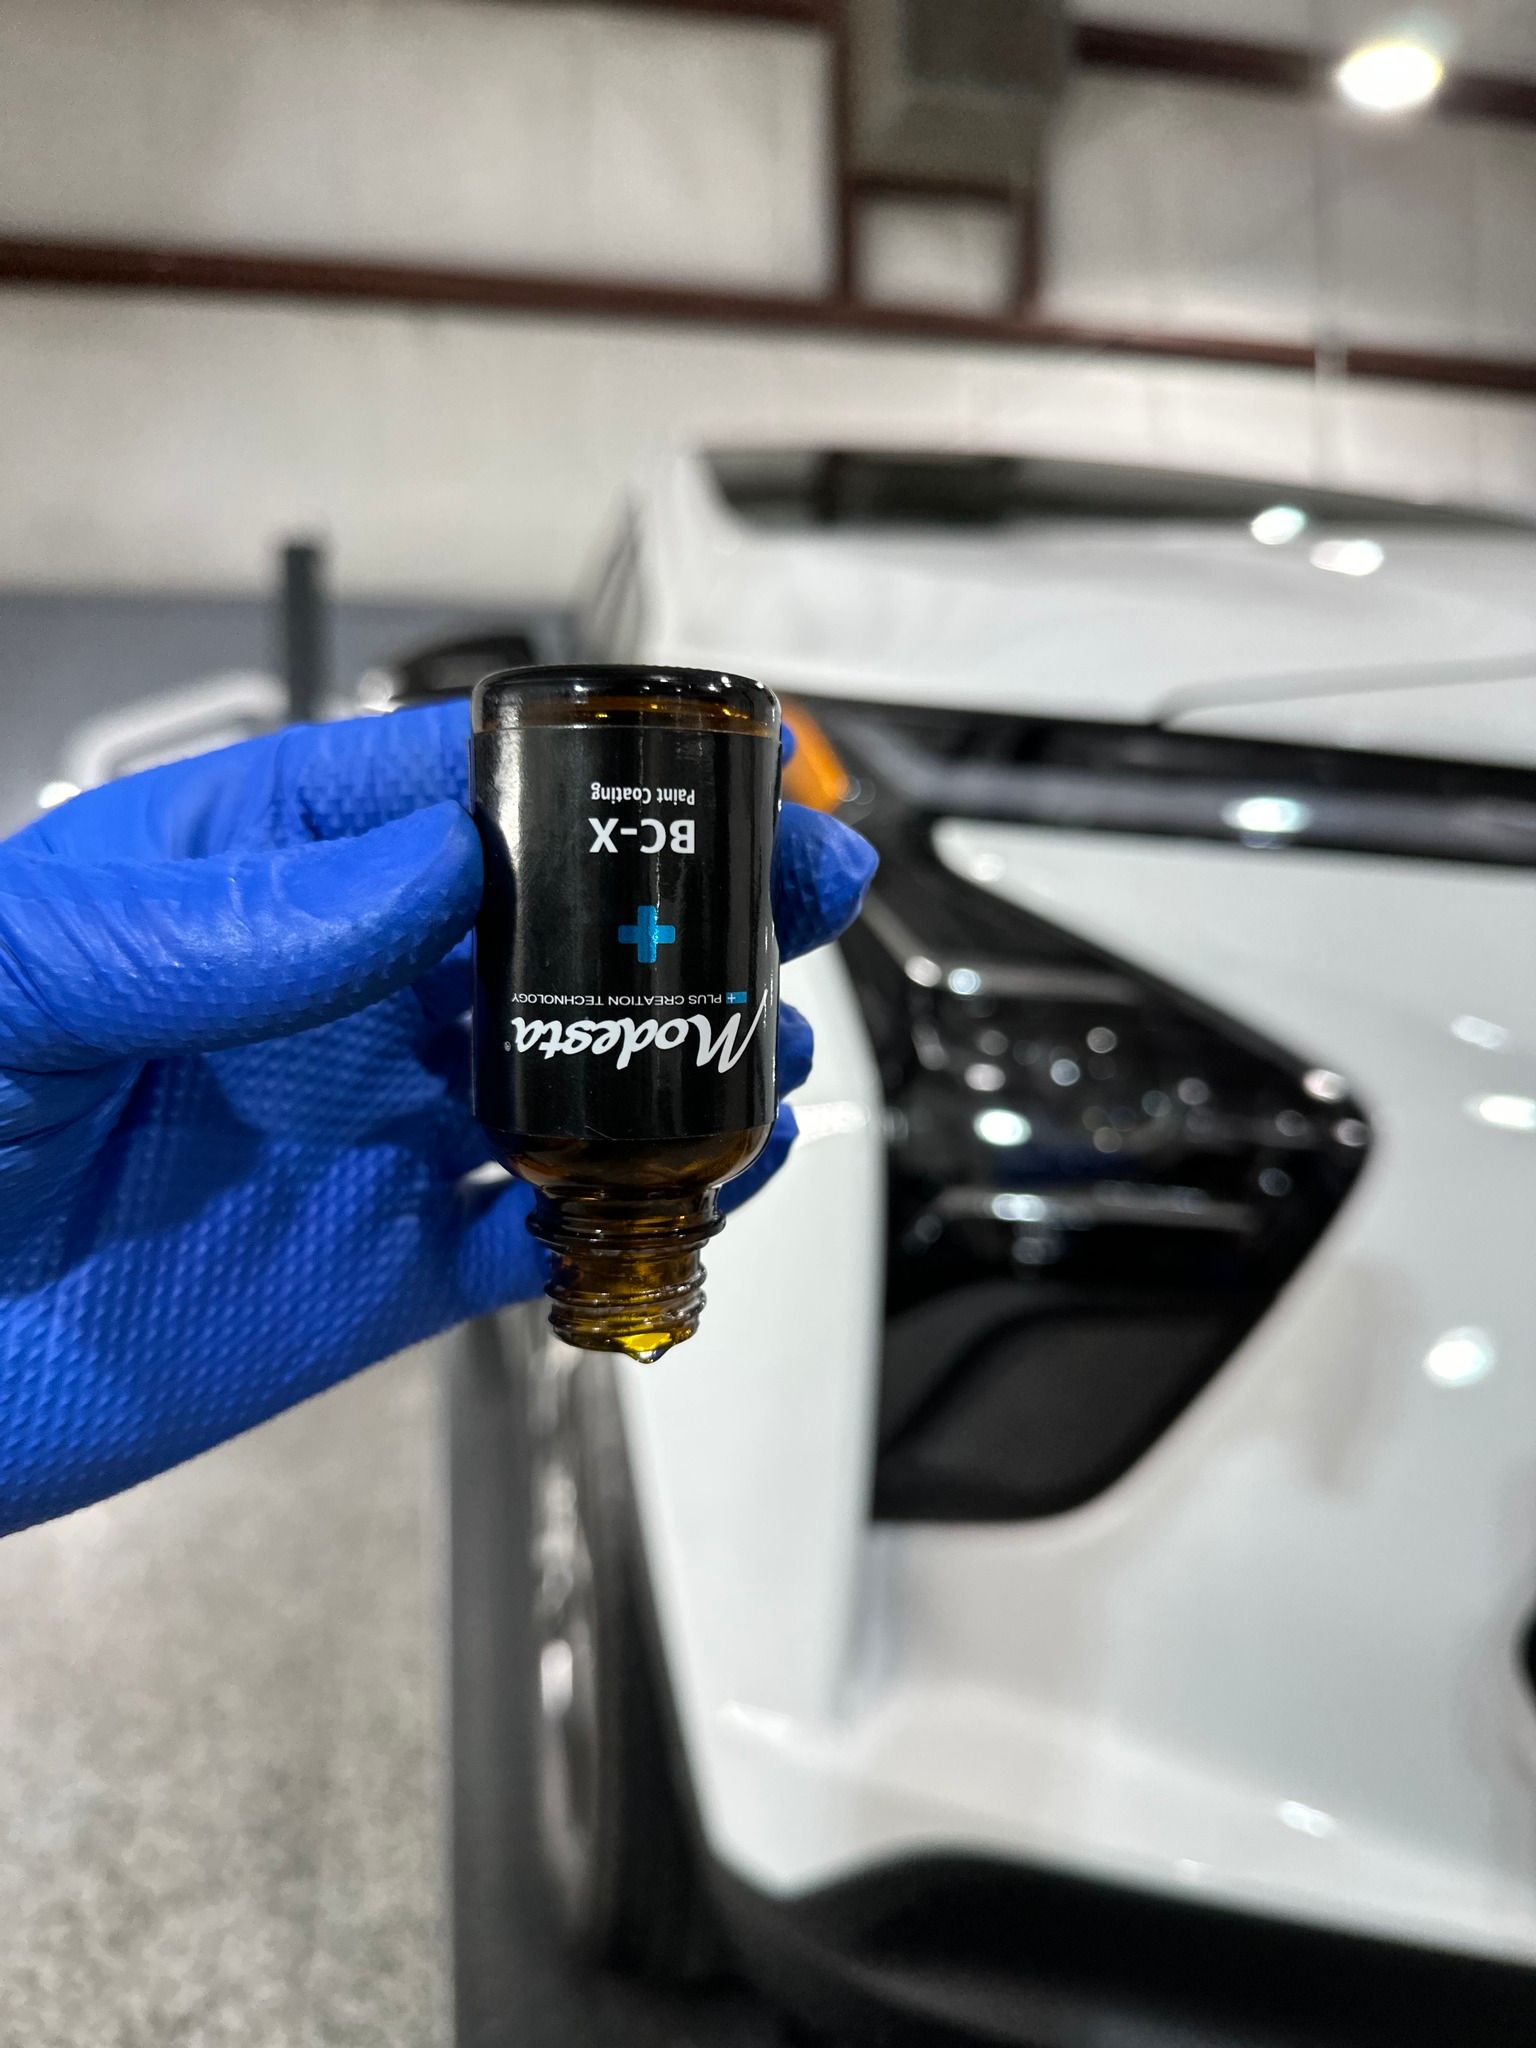 This new Chevy Bolt EV is protected with Modesta's newest coating, BC-X